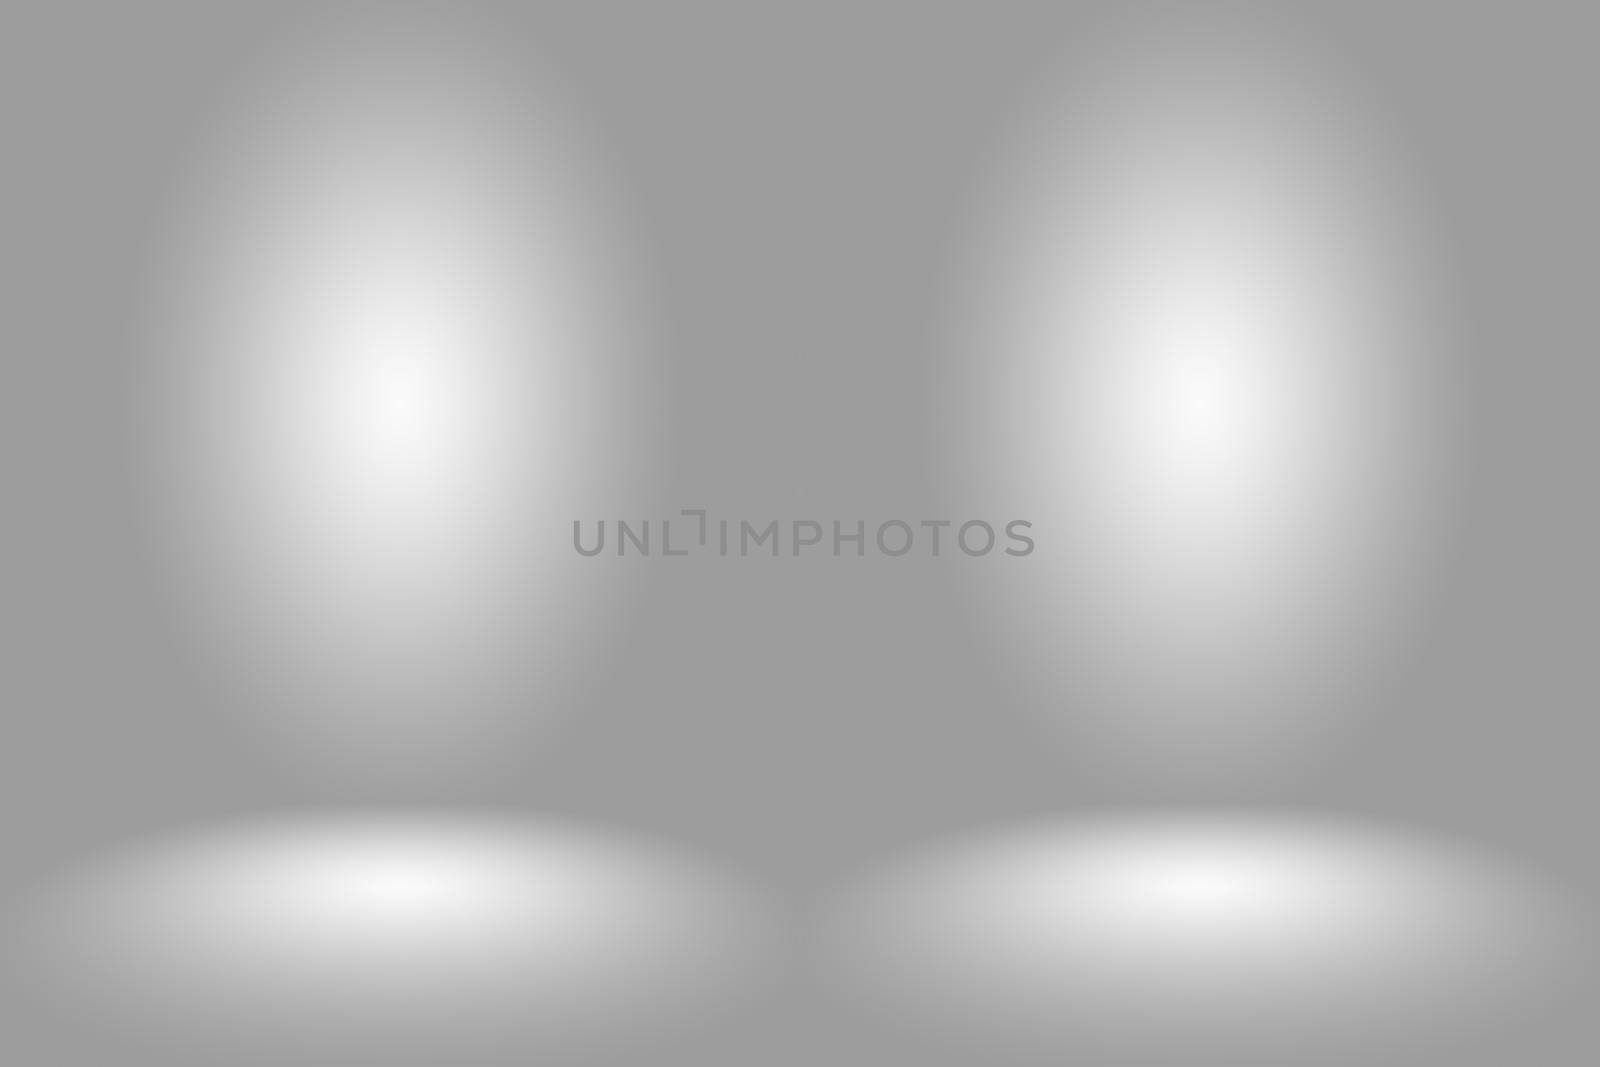 Abstract Empty Dark White Grey gradient with Black solid vignette lighting Studio wall and floor background well use as backdrop.